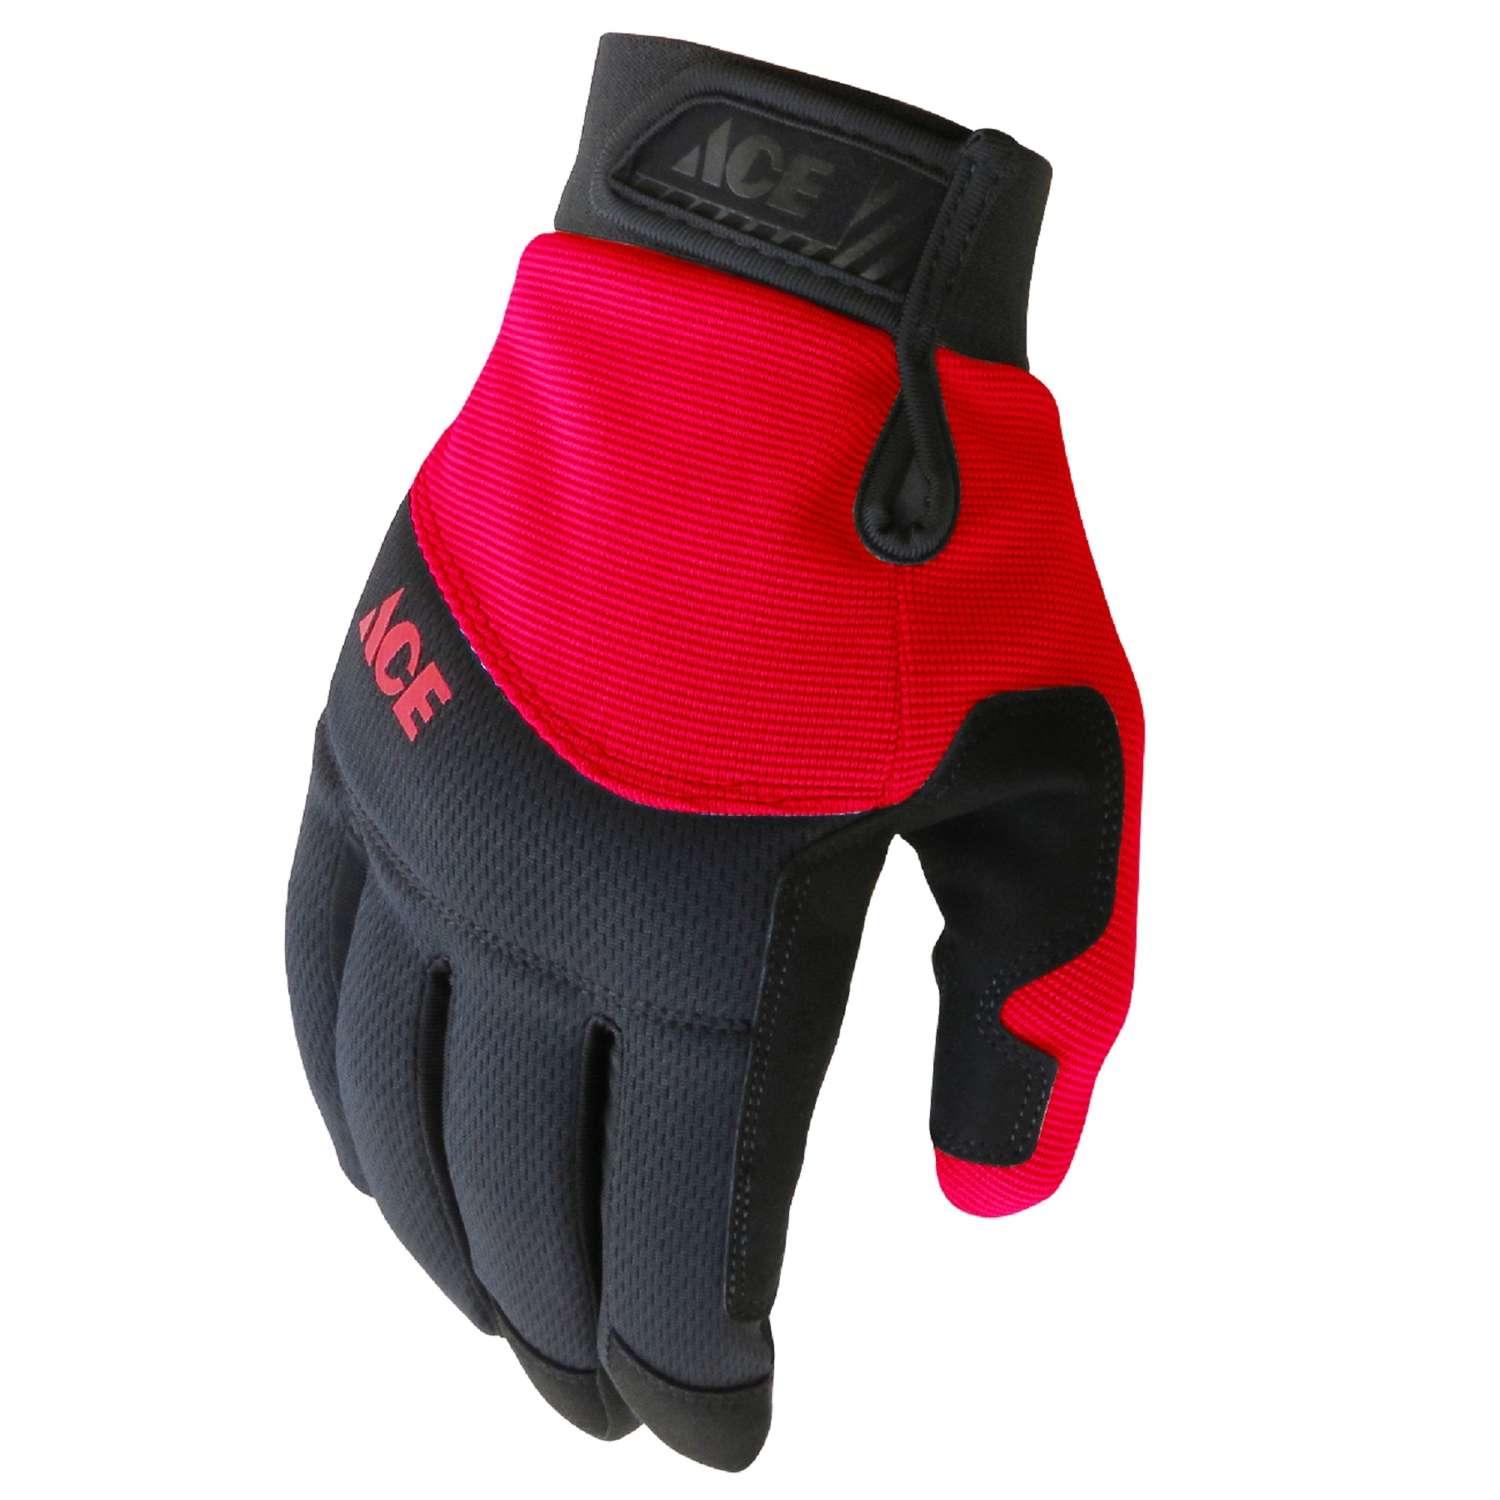 Ace XL I-Mesh General Purpose Black/Red Gloves - Ace Hardware